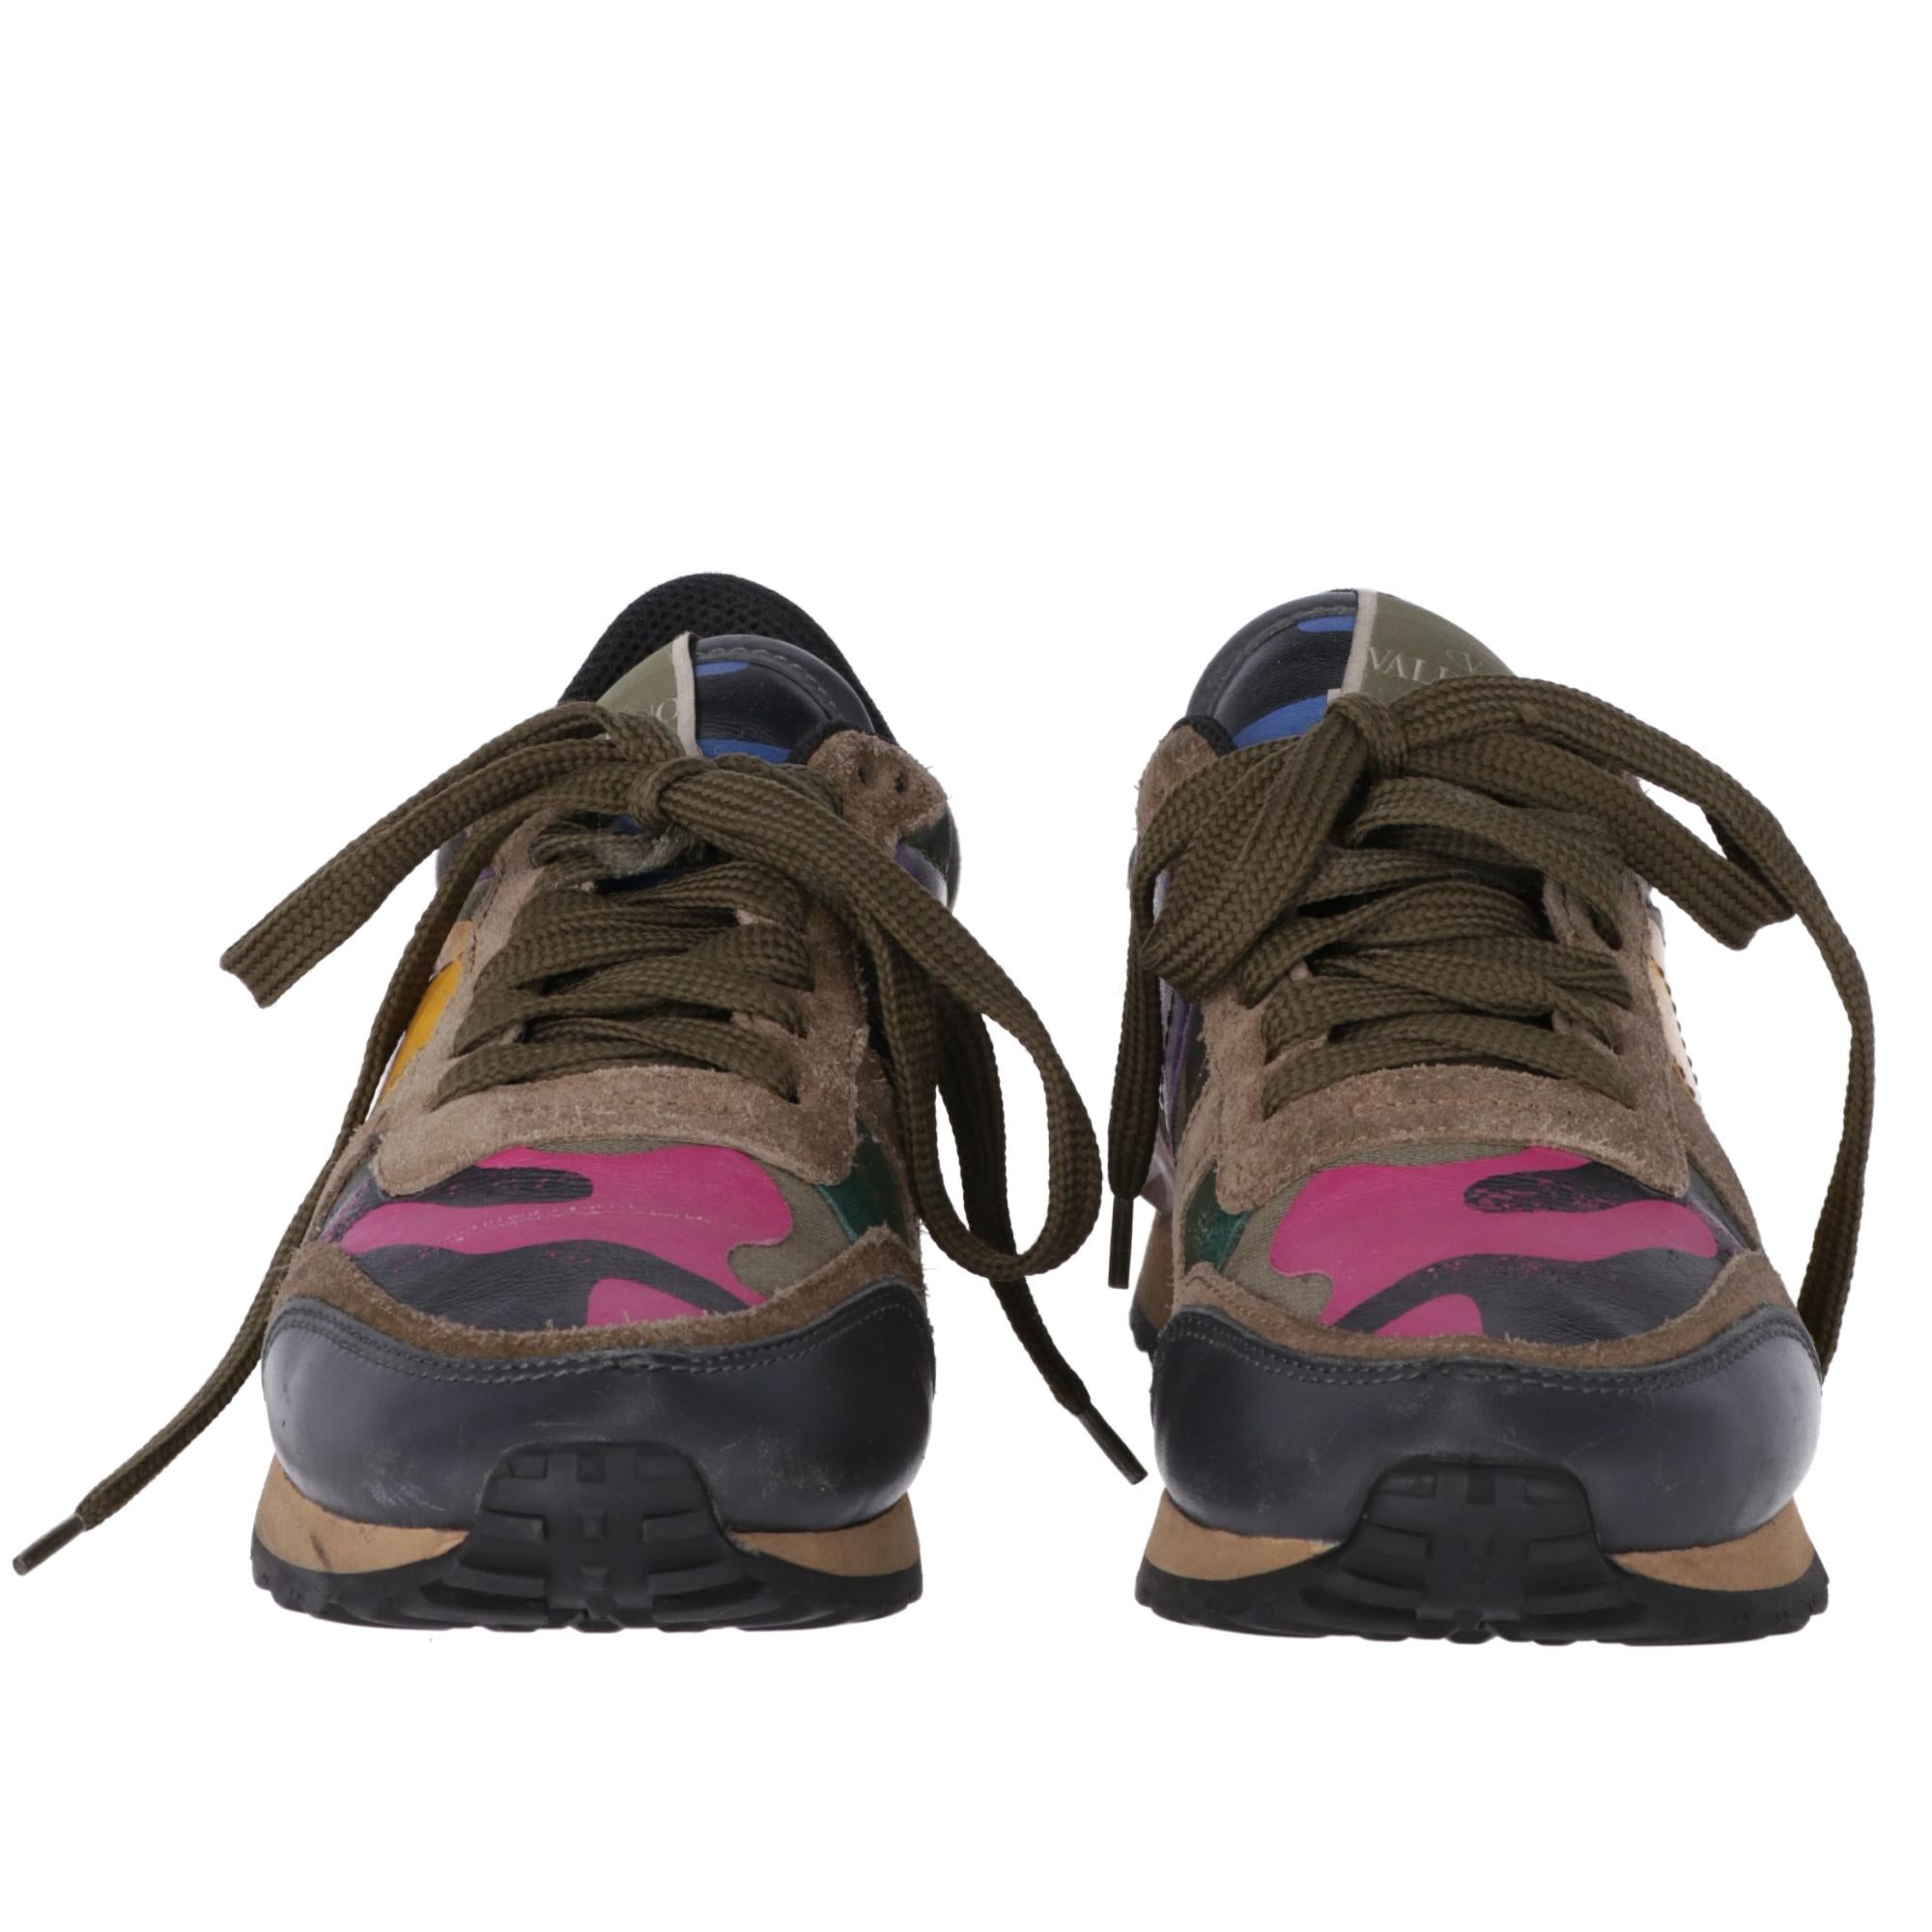 Valentino Garavani Rockrunner sneakers in leather, suede and fabric with green, fuchsia, purple and yellow camouflage pattern, rubber sole with rubber studs detail. Box, spare laces and dust bag are included.

The shoes showed slight signs of wear